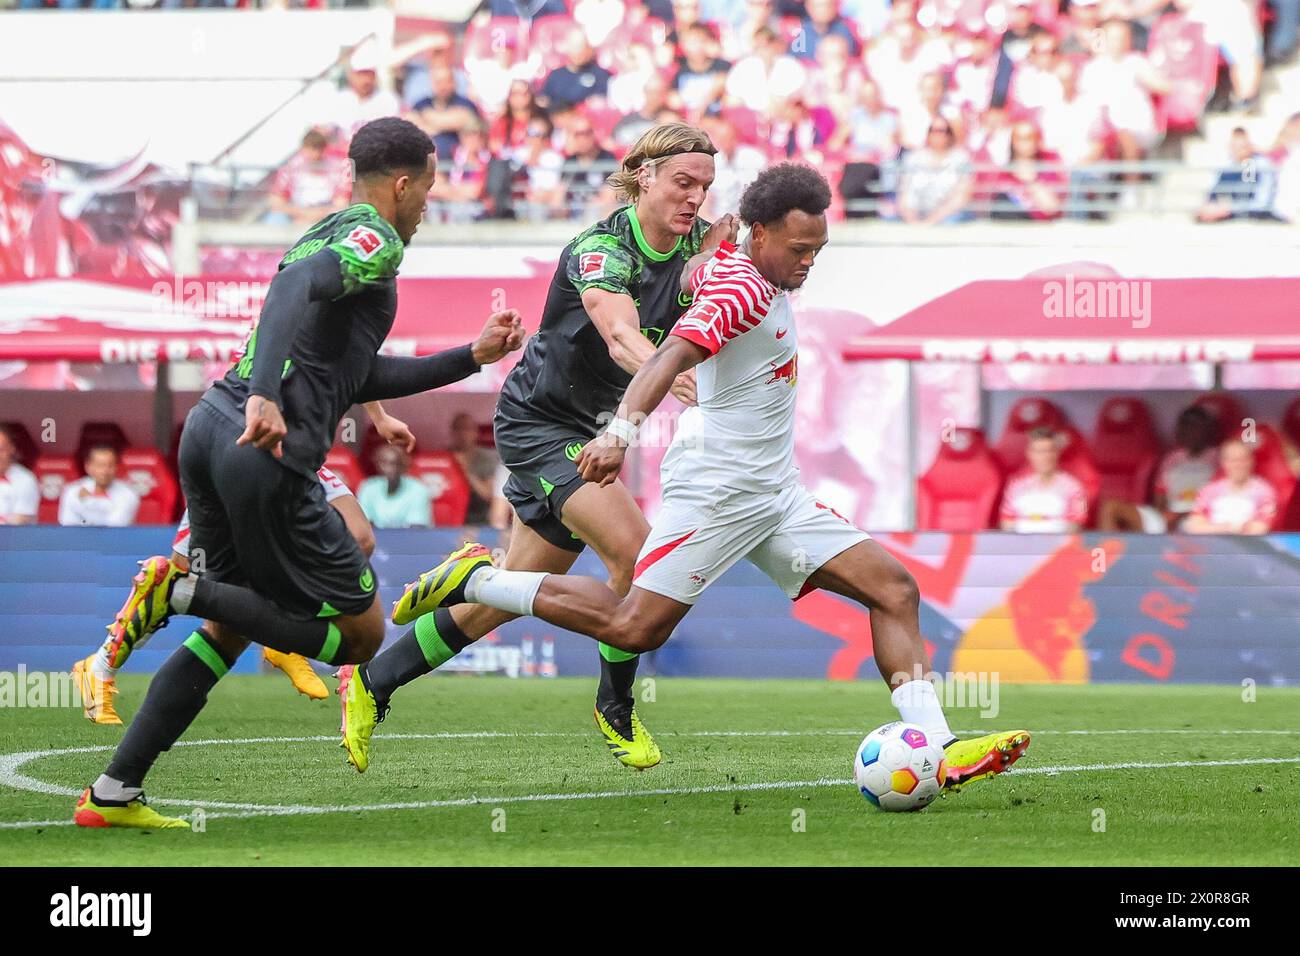 Leipzig, Germany. 13th Apr, 2024. Soccer: Bundesliga, RB Leipzig - VfL Wolfsburg, matchday 29 at the Red Bull Arena. Leipzig player Lois Openda (r) scores to make it 3:0, Wolfsburg's Sebastiaan Bornauw (M) and Aster Vranckx (l) cannot prevent the goal. Credit: Jan Woitas/dpa - IMPORTANT NOTE: In accordance with the regulations of the DFL German Football League and the DFB German Football Association, it is prohibited to utilize or have utilized photographs taken in the stadium and/or of the match in the form of sequential images and/or video-like photo series./dpa/Alamy Live News Stock Photo